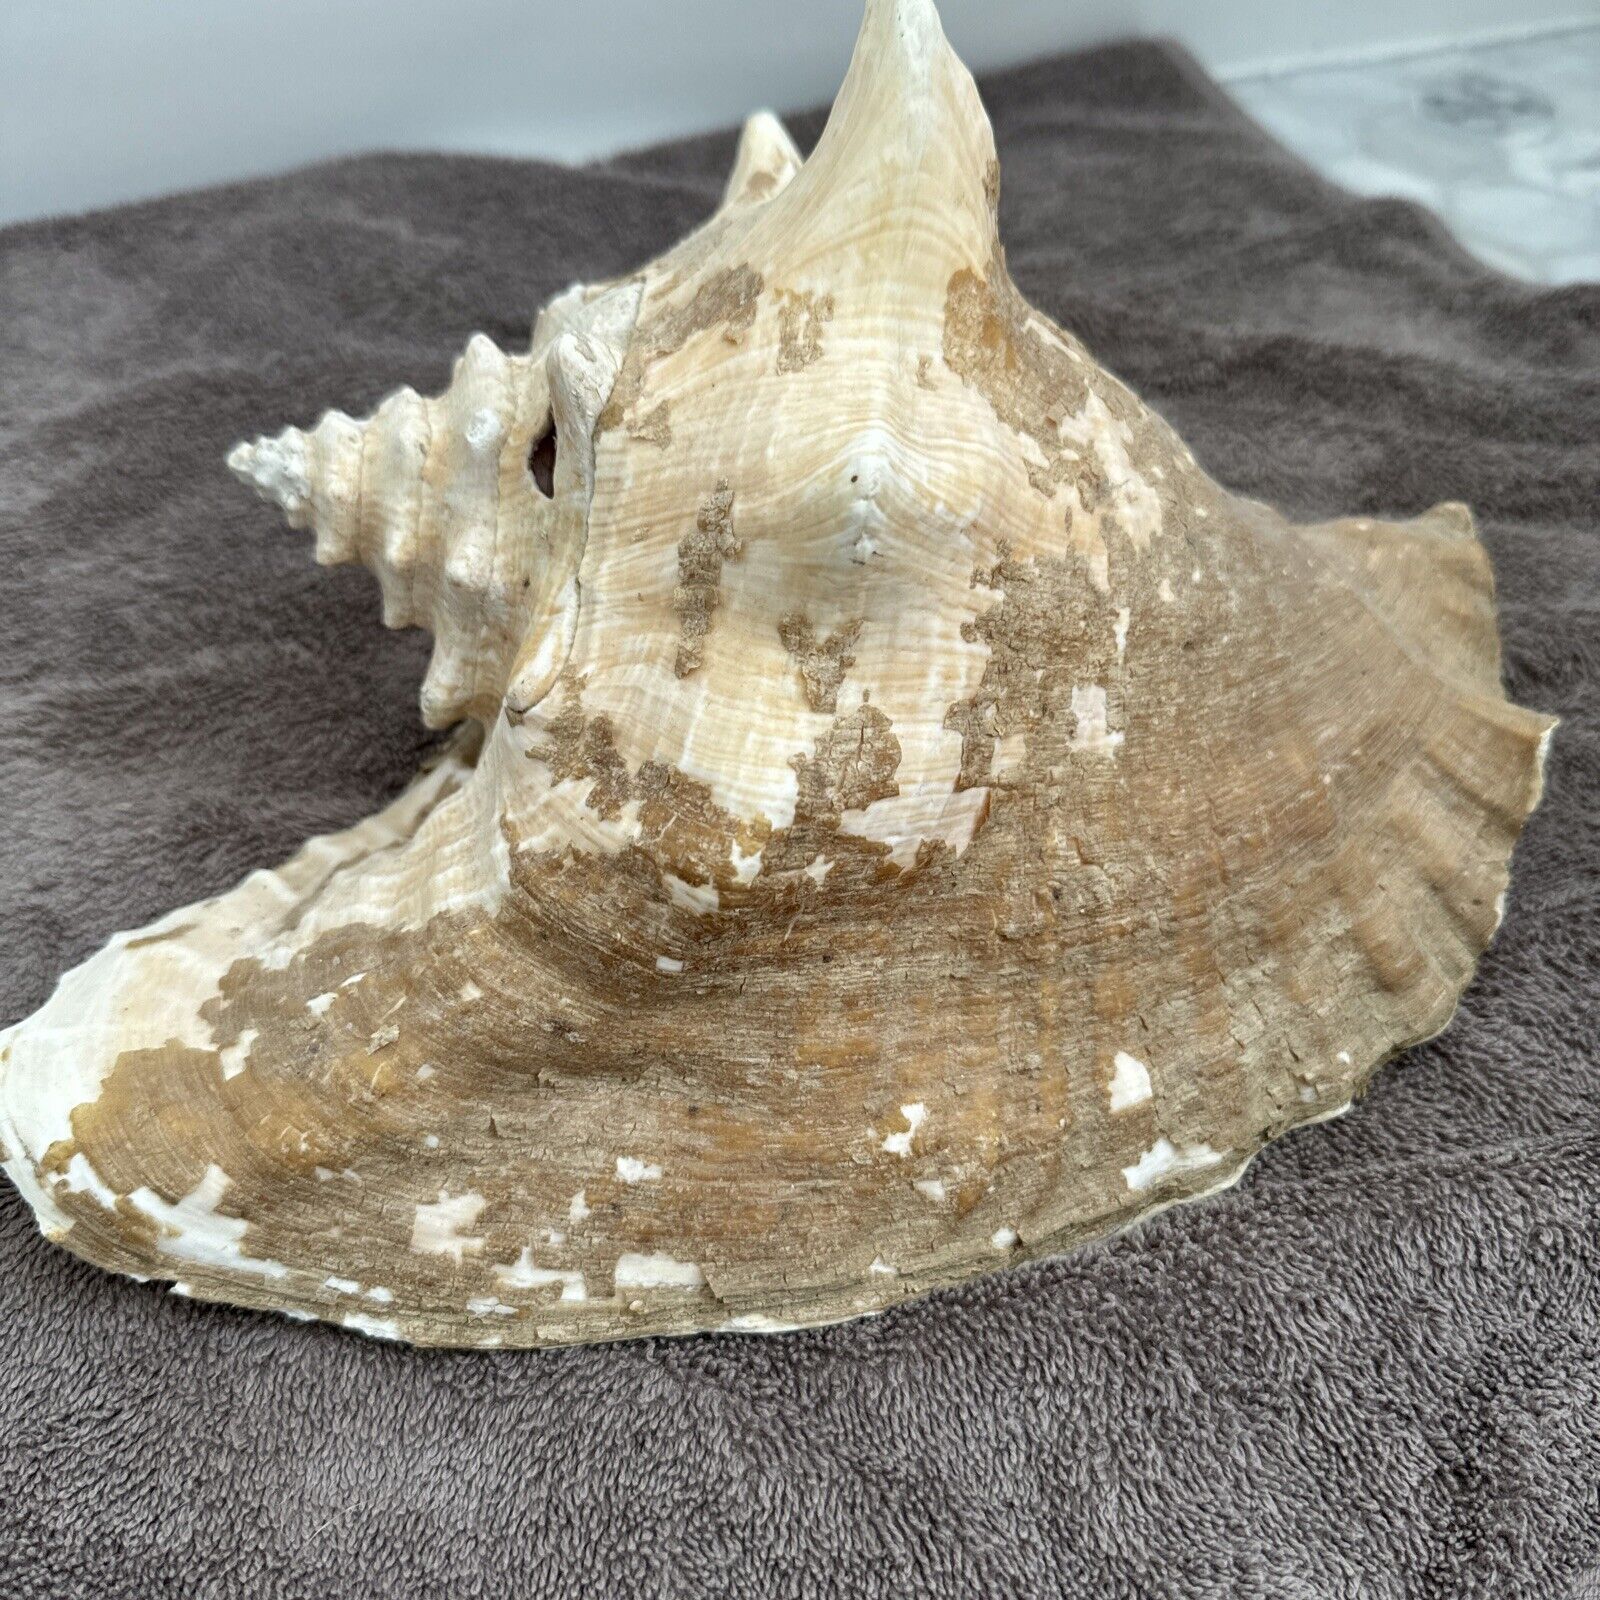 Gorgeous Large Conch Shell - Natural Beauty